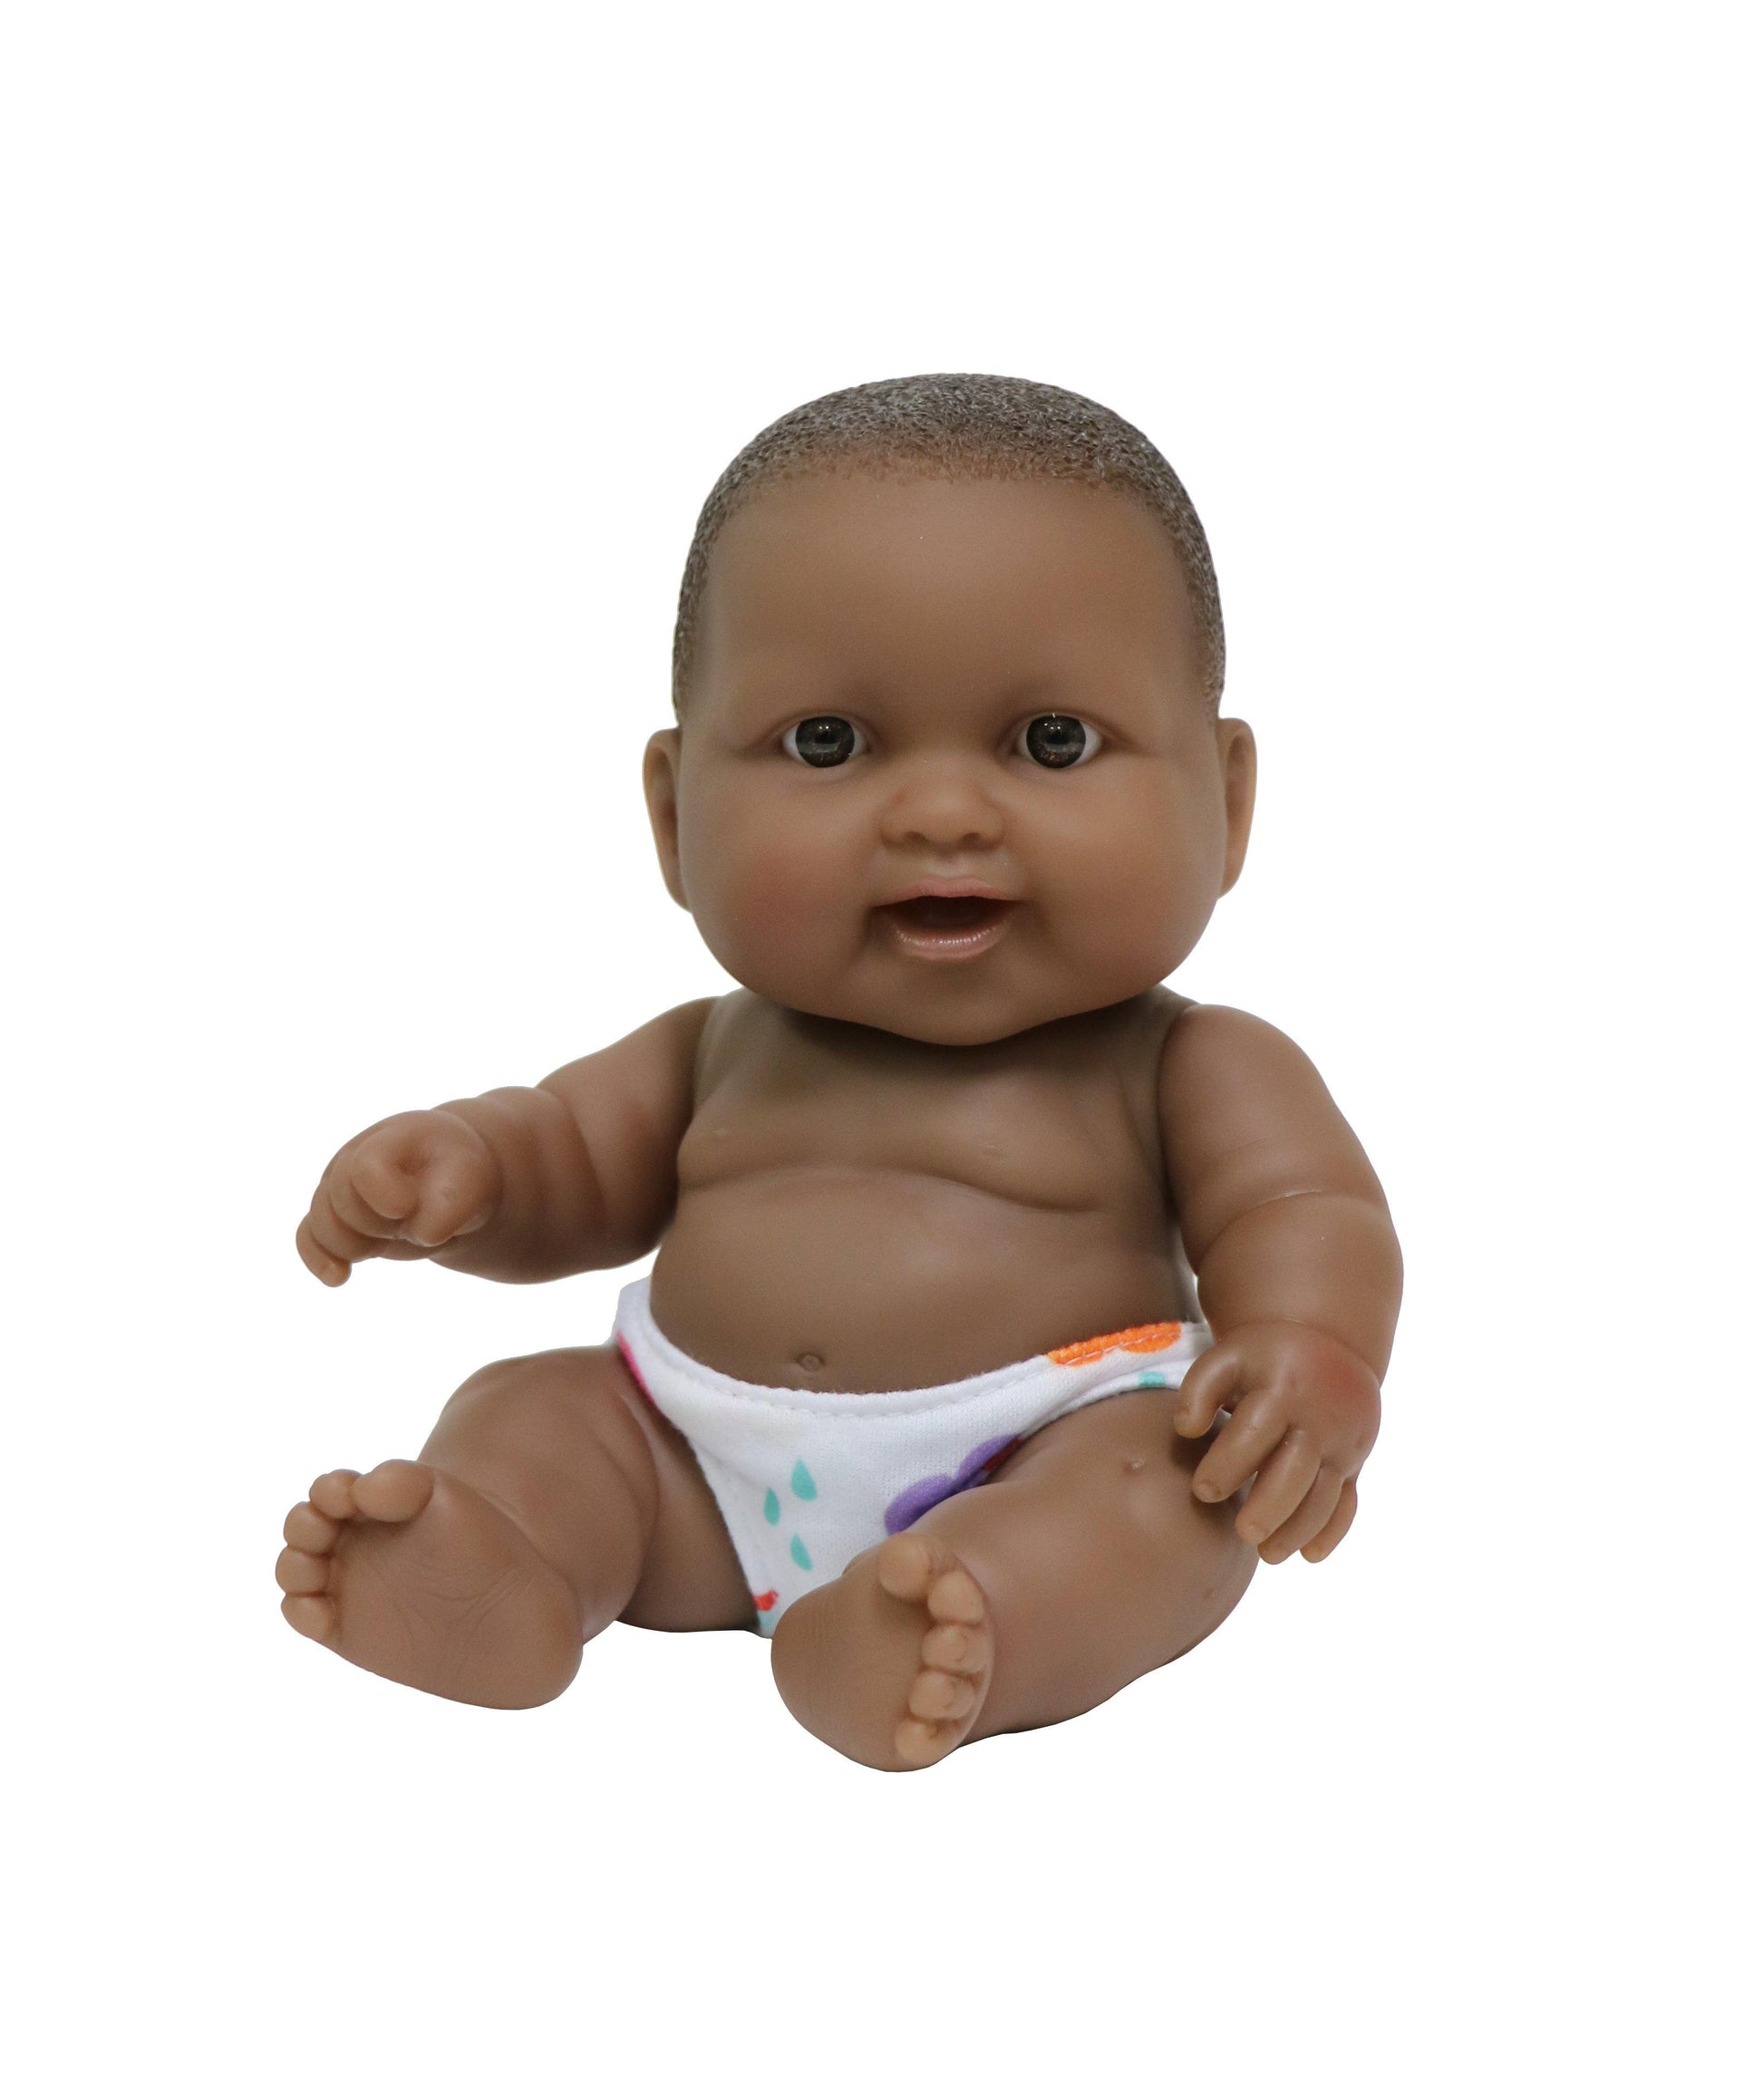 Lots to Love Babies 10" African-American All Vinyl Doll Assortment - PDQ - JC Toys Group Inc.